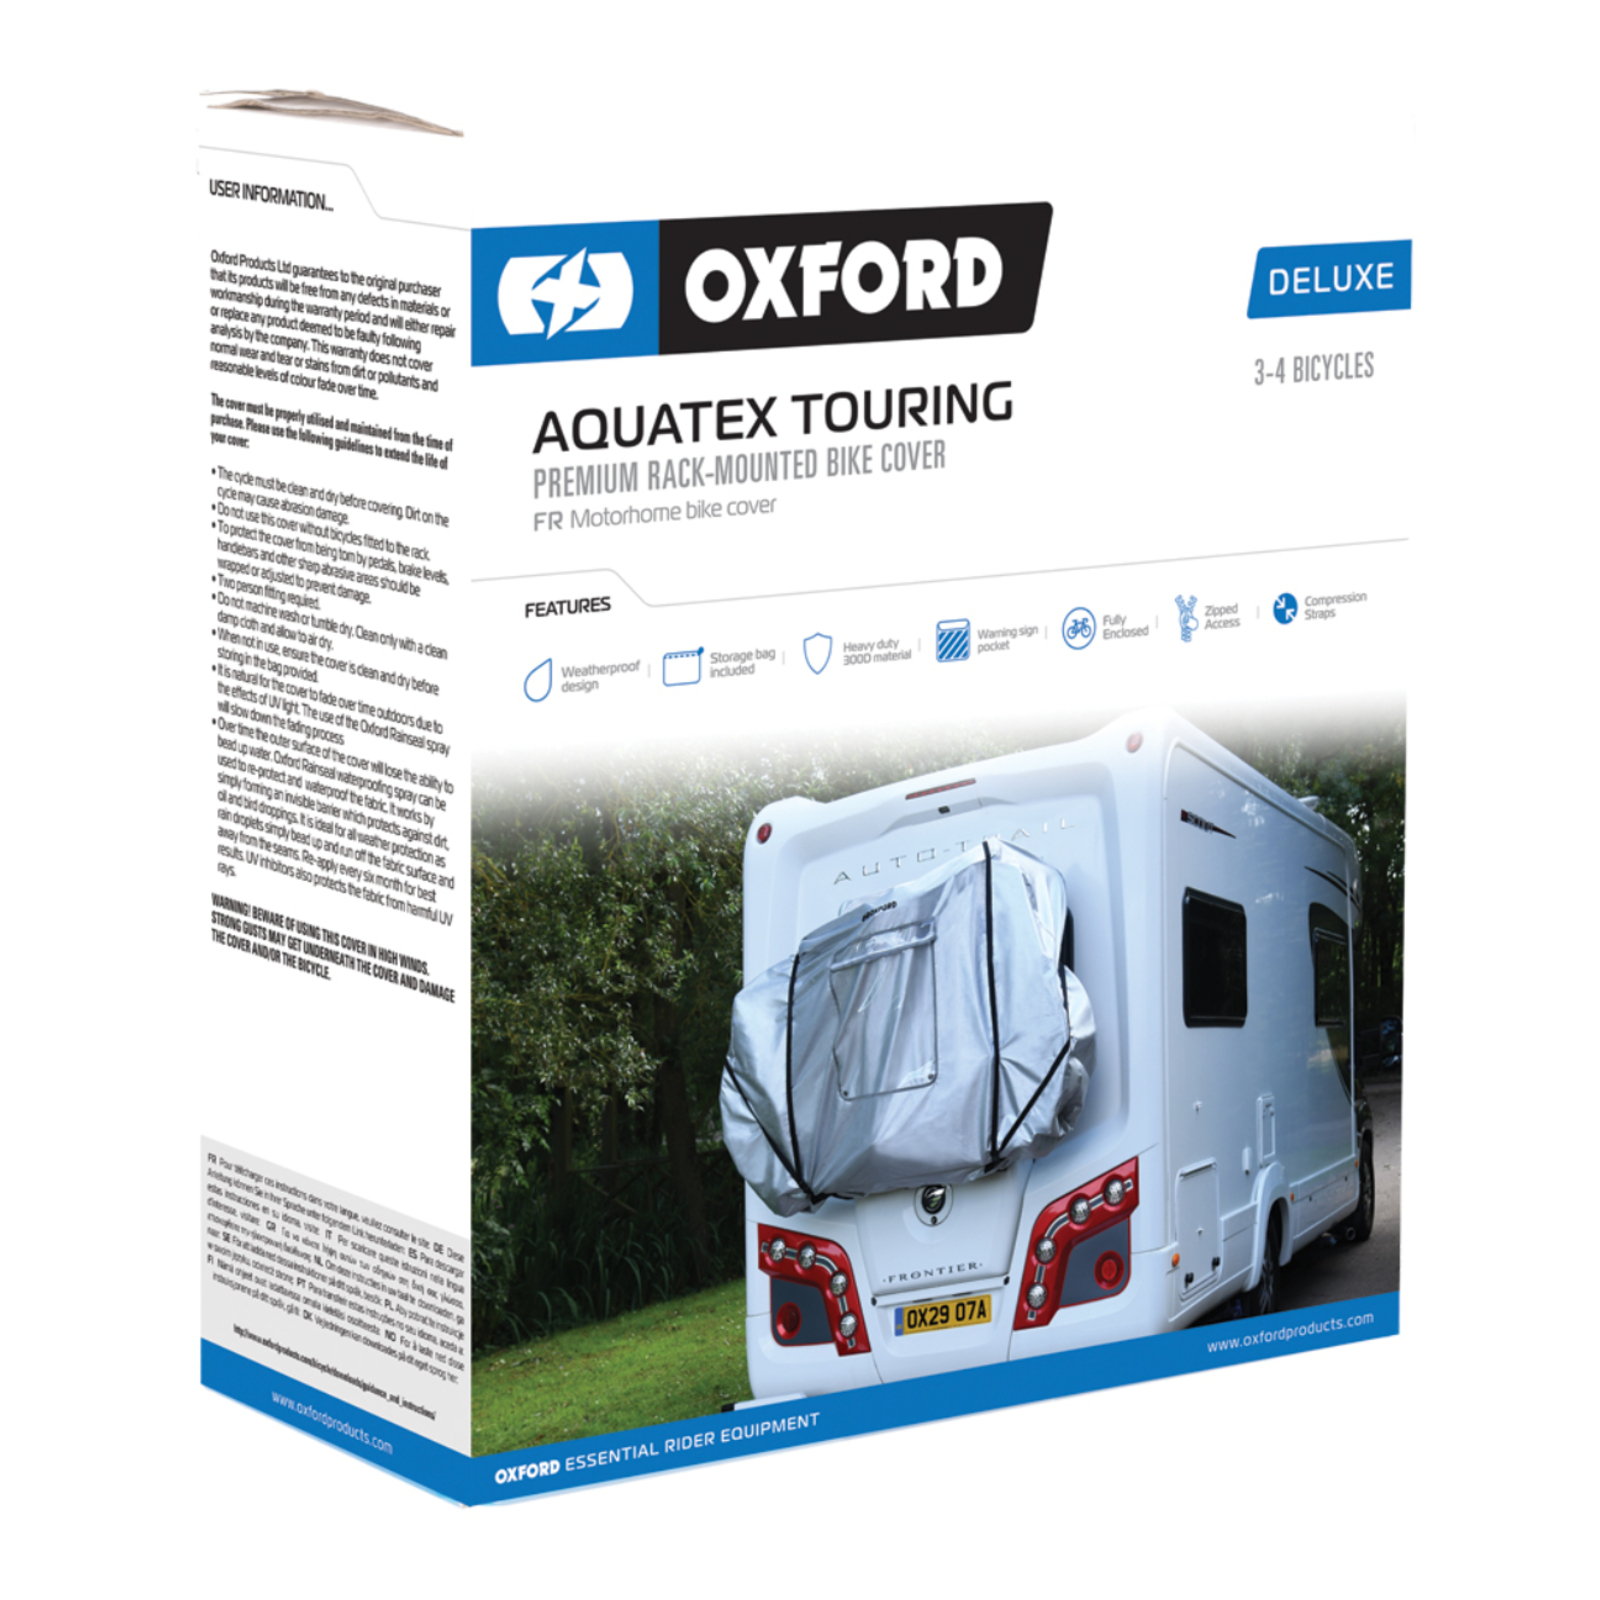 OXFORD AQUATEX TOURING DELUXE BIKE COVER FOR 3-4 BIKES